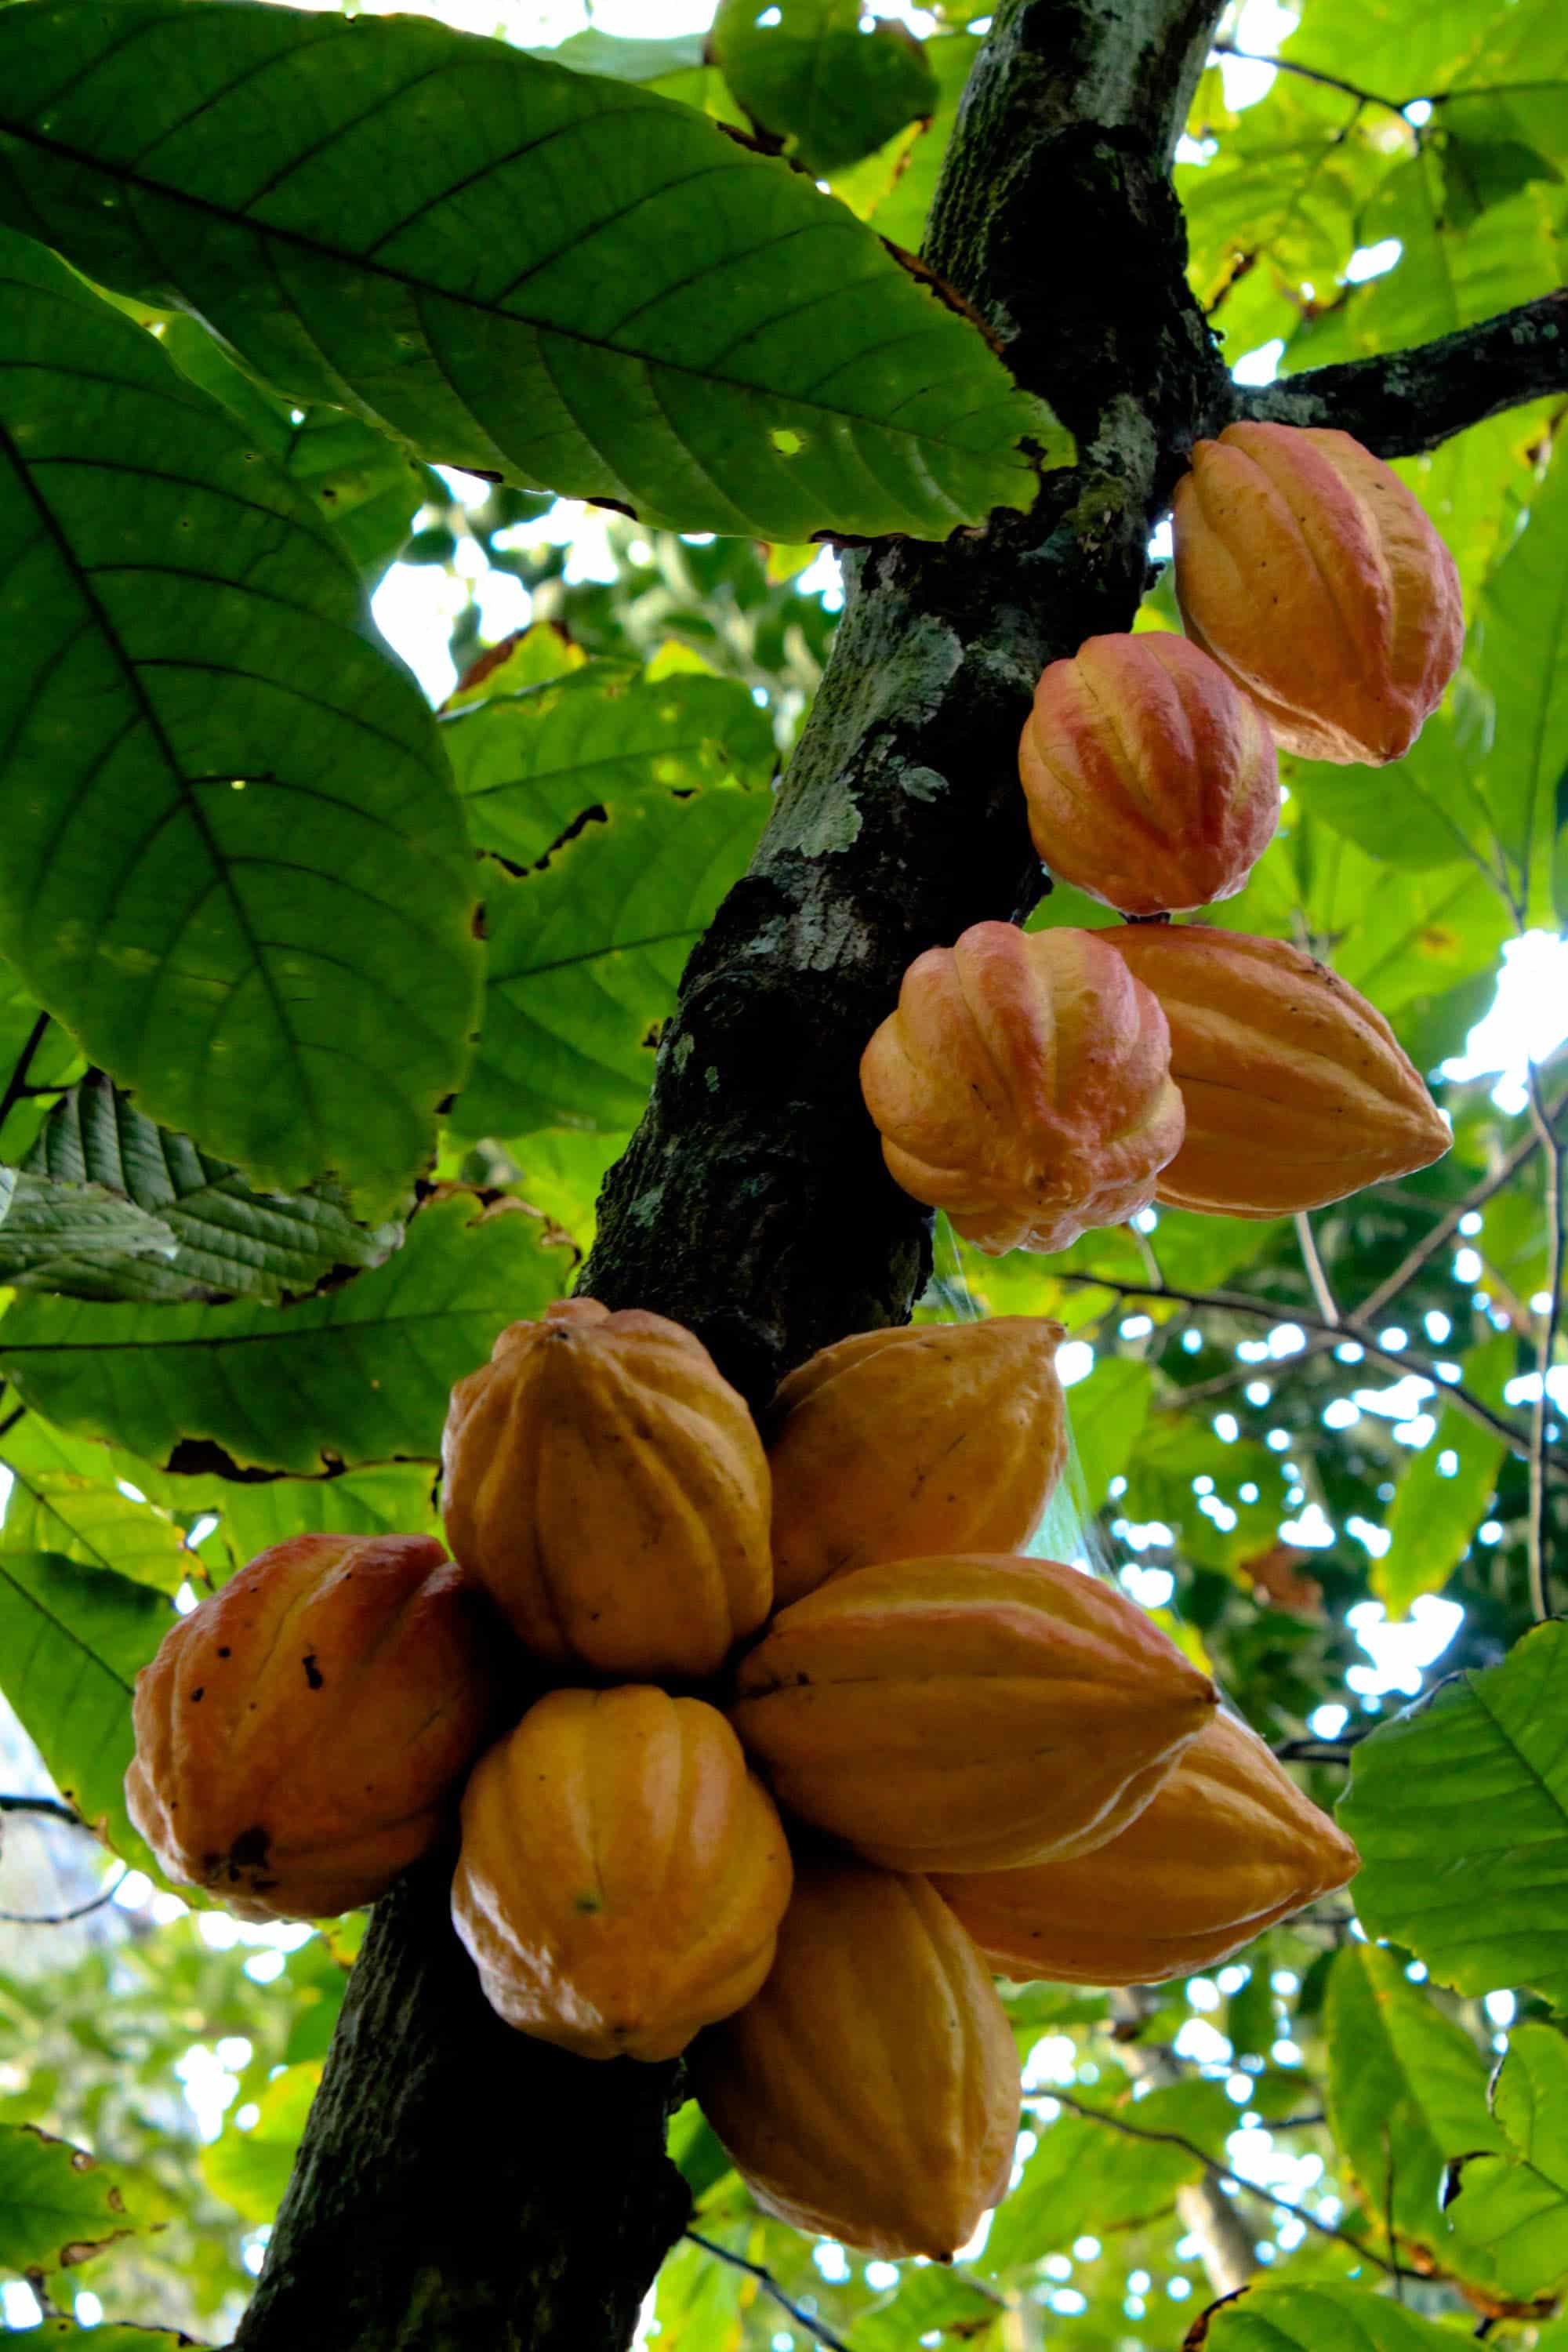 Cacao fruits. Image credits: Luisovalles.